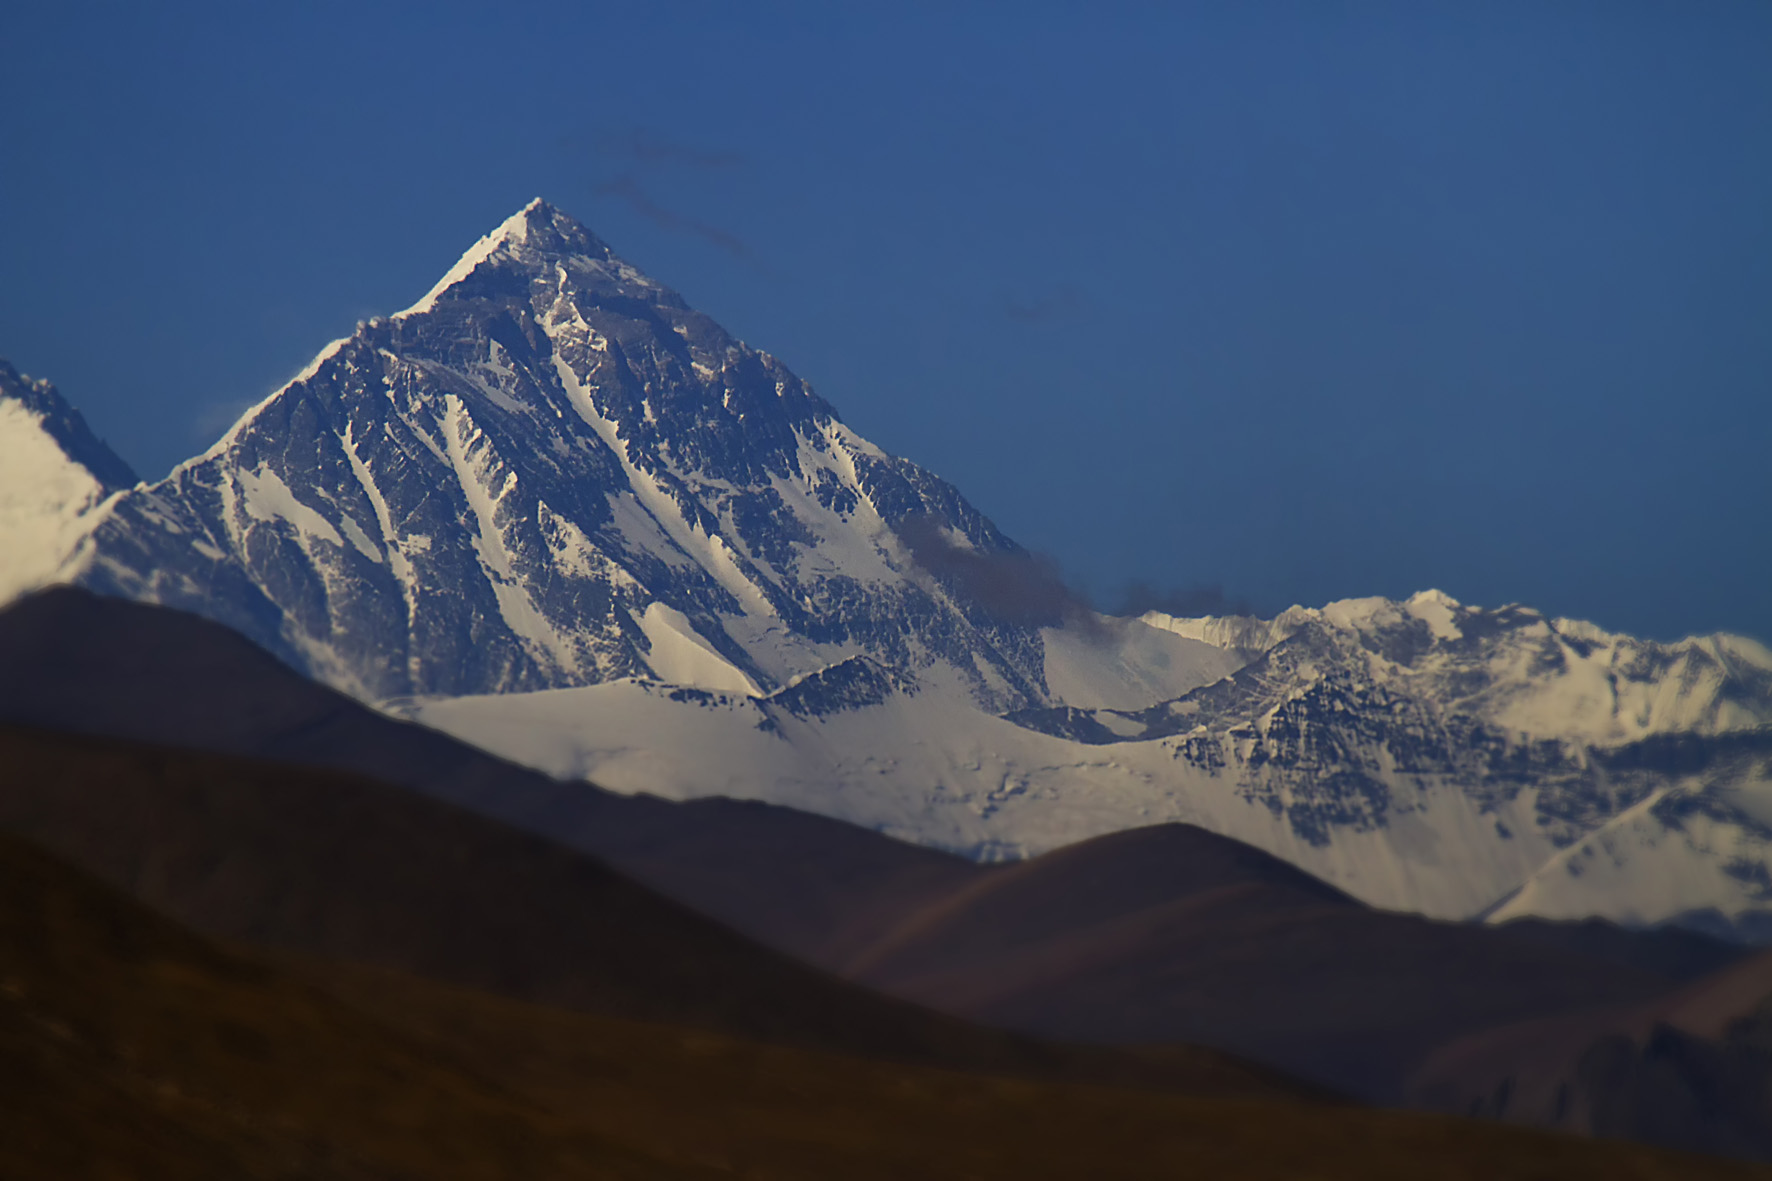 Mount Everest - North face from Tibet